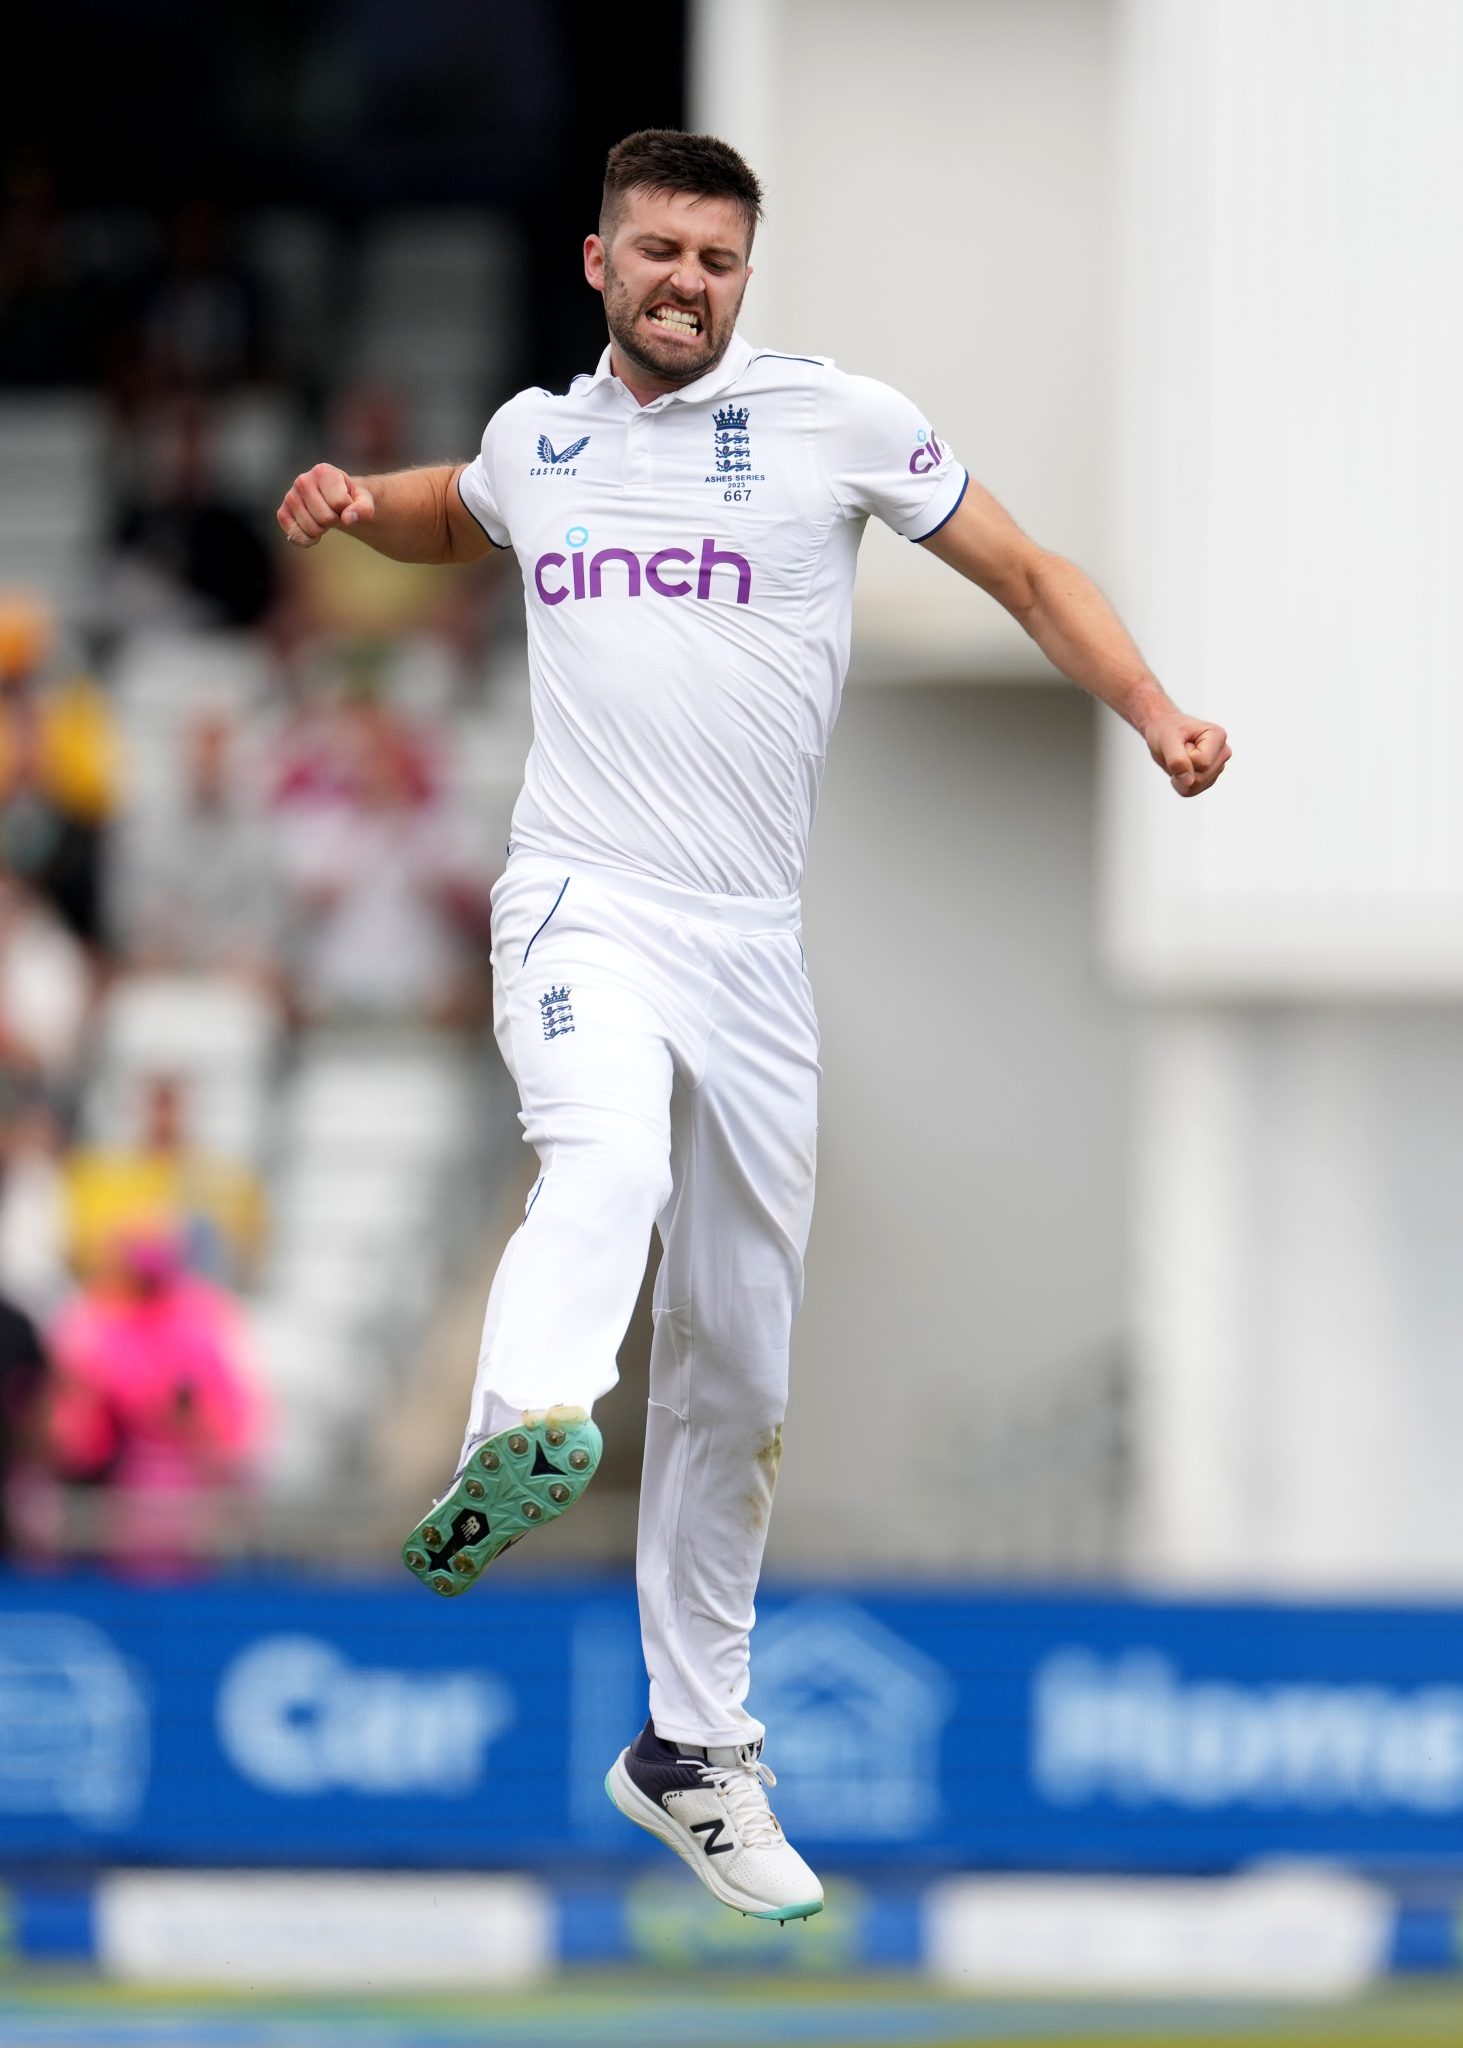 Fiery Mark Wood and Stuart Broad give England flying start to must-win Test